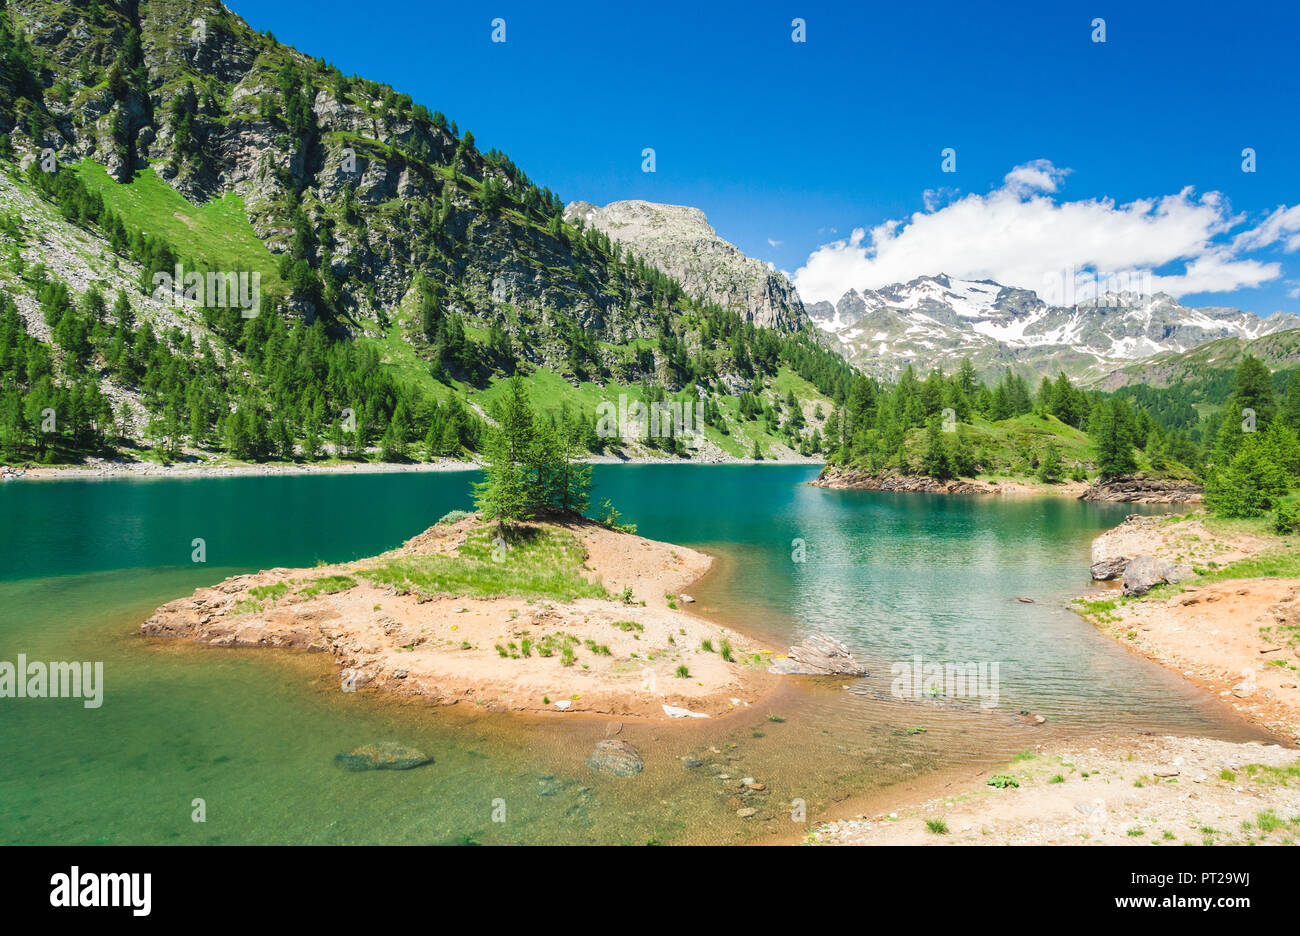 Alpe Devero Codelago High Resolution Stock Photography and Images - Alamy